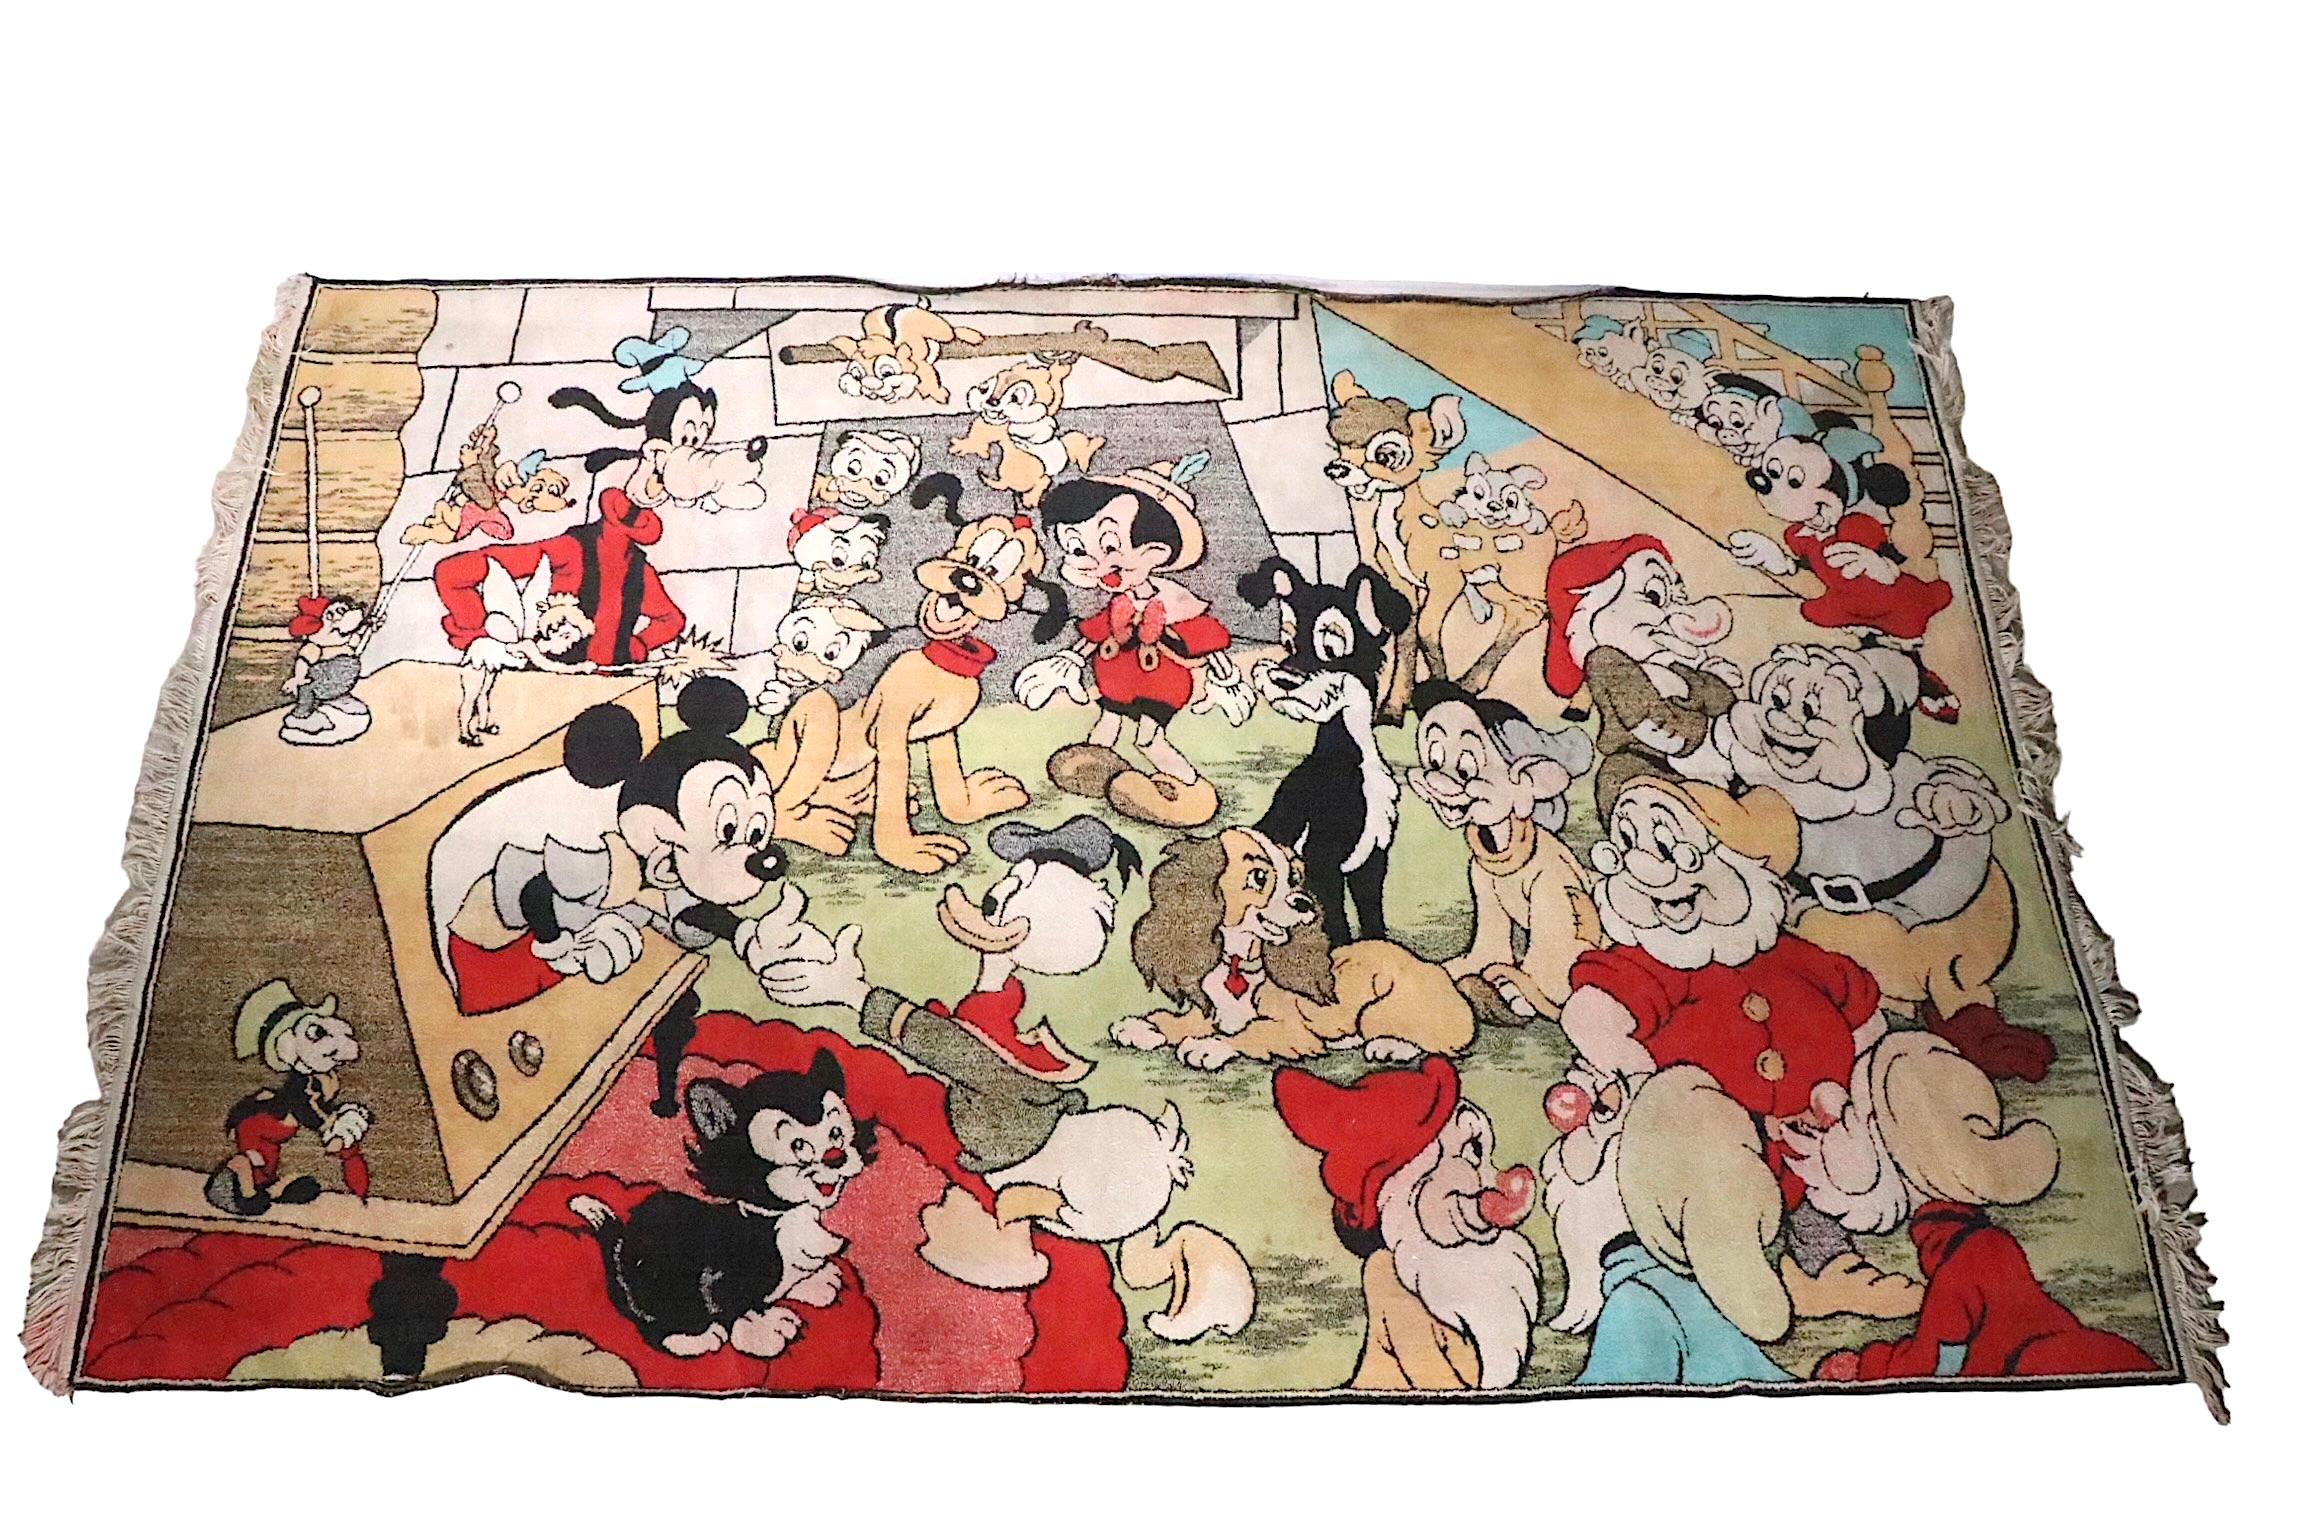 Mid-20th Century Vintage Disney Character Play Pen Rug c 1960's Mickey Mouse Donald Duck etc. For Sale